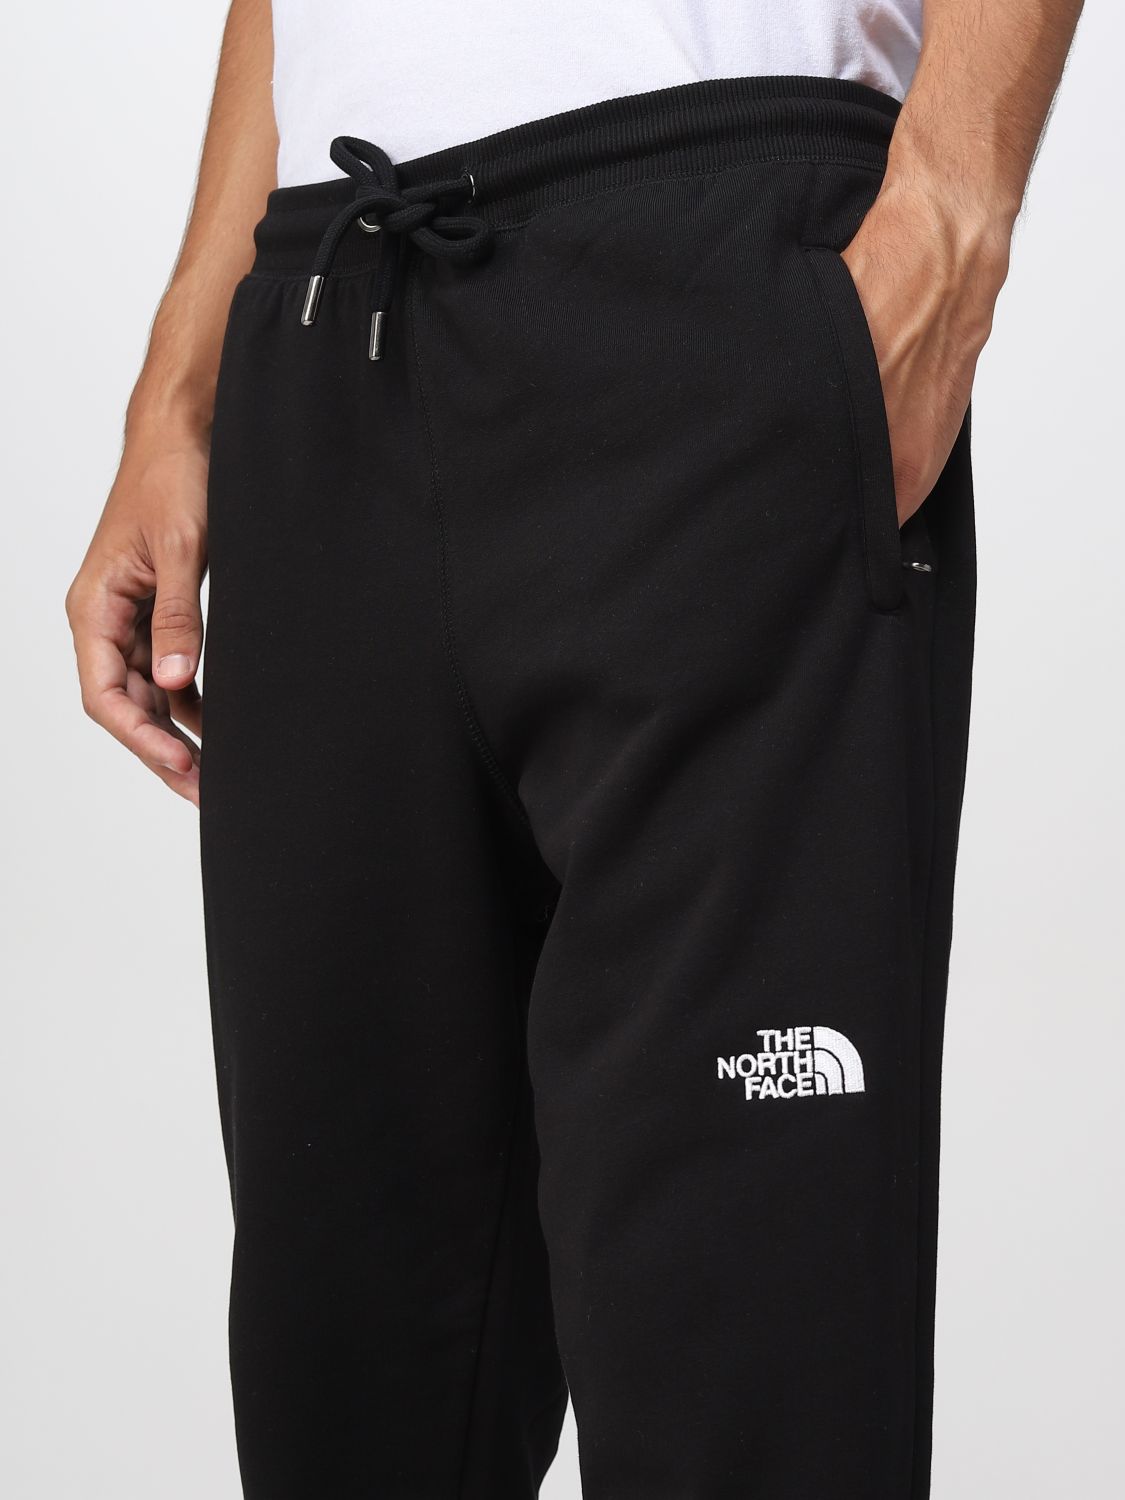 THE NORTH FACE: pants for man - Black | The North Face pants NF0A4SVQ ...